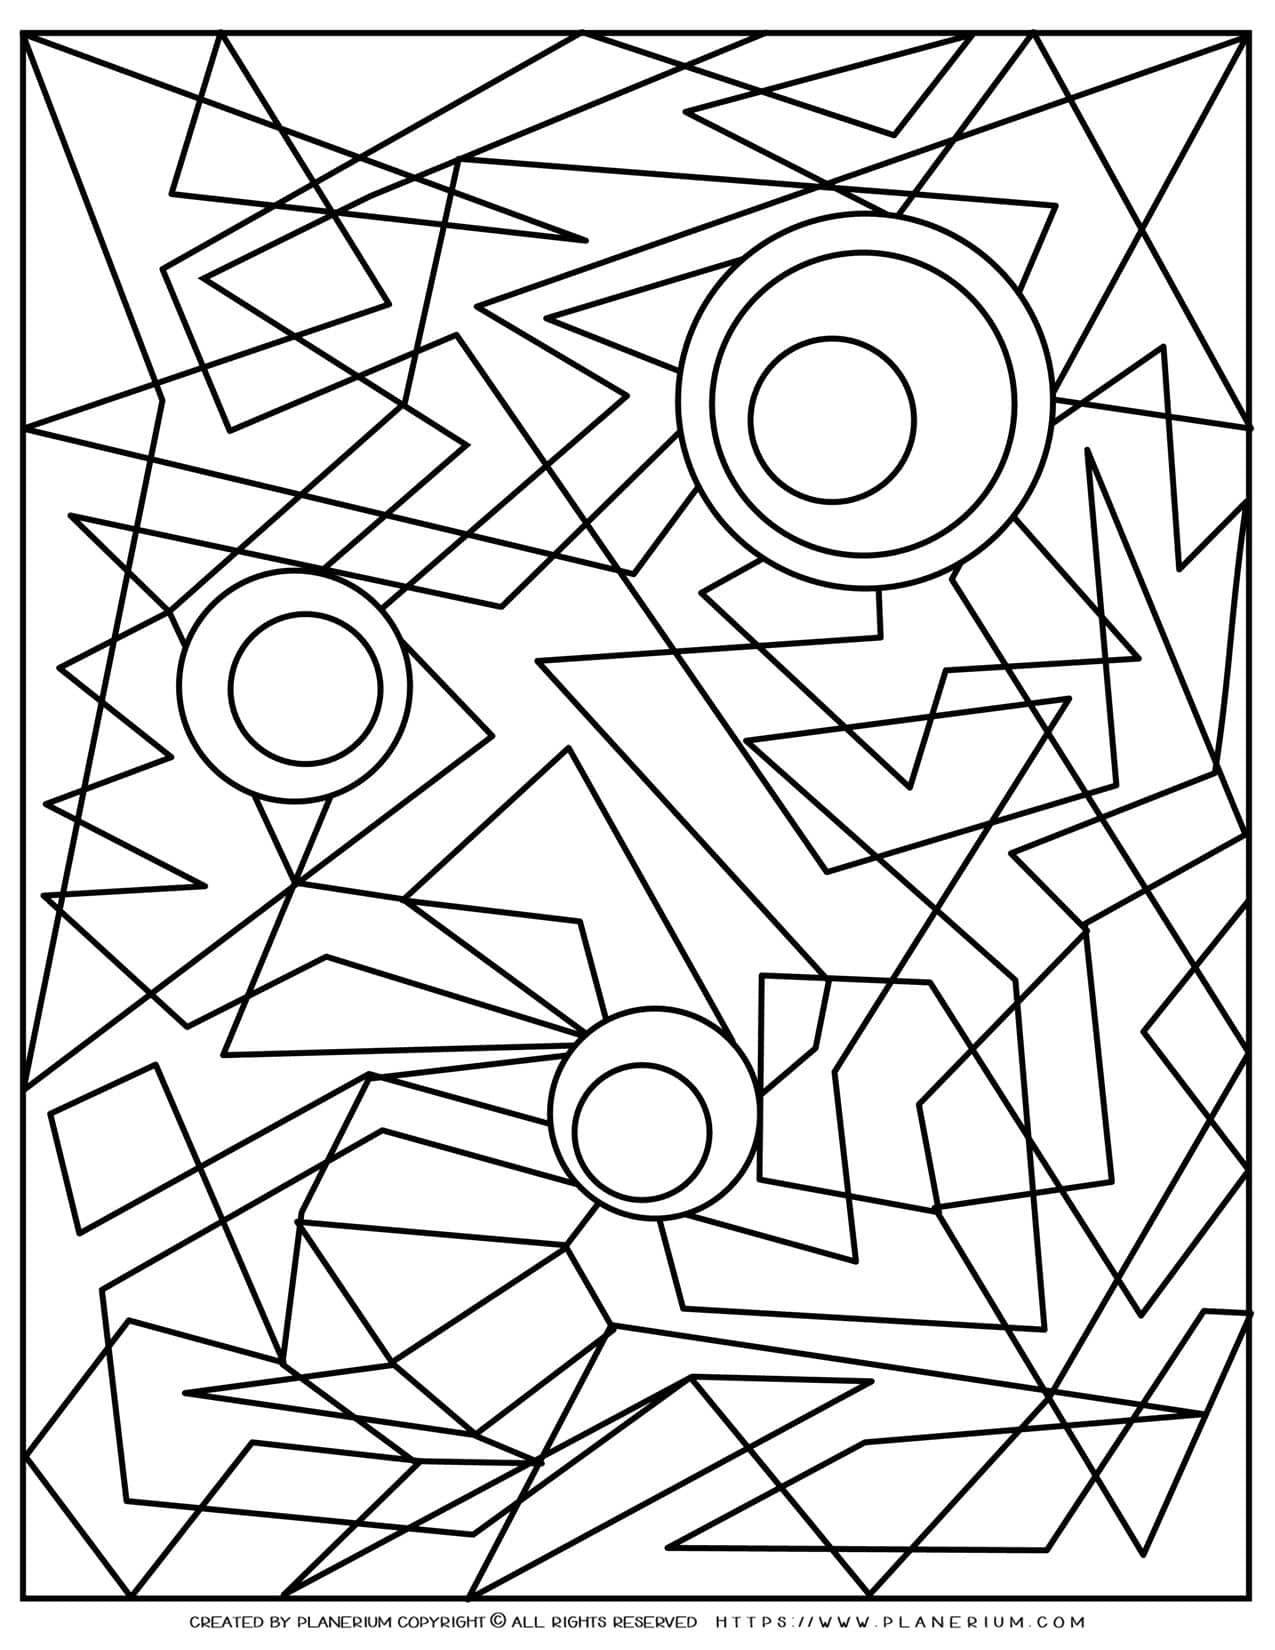 Adult Coloring Pages - Geometric Abstract | Planerium